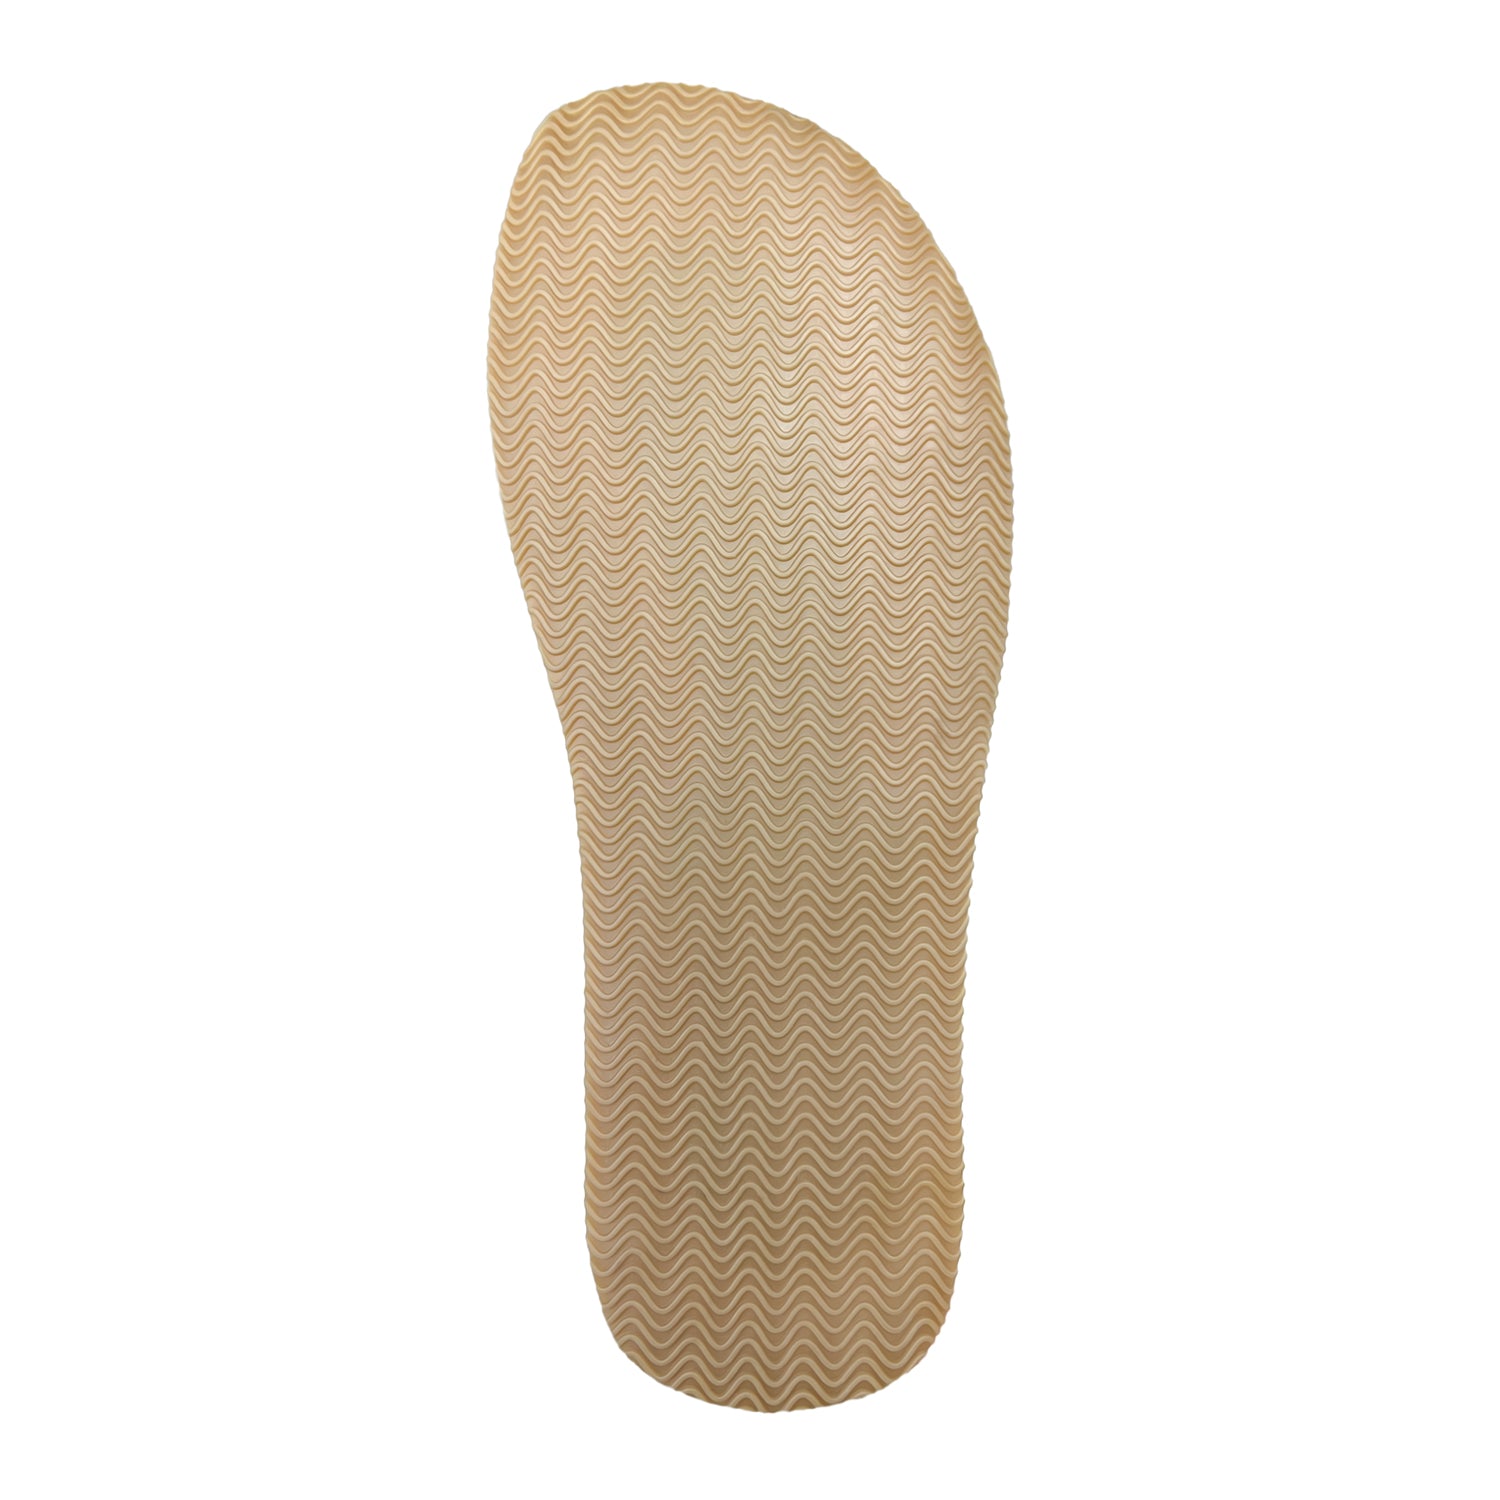 A beige shoe insole with a wavy pattern texture on its surface, perfect for strength athletes, like the Ursus Canvas | Low-Top | Arctic White by Bearfoot.